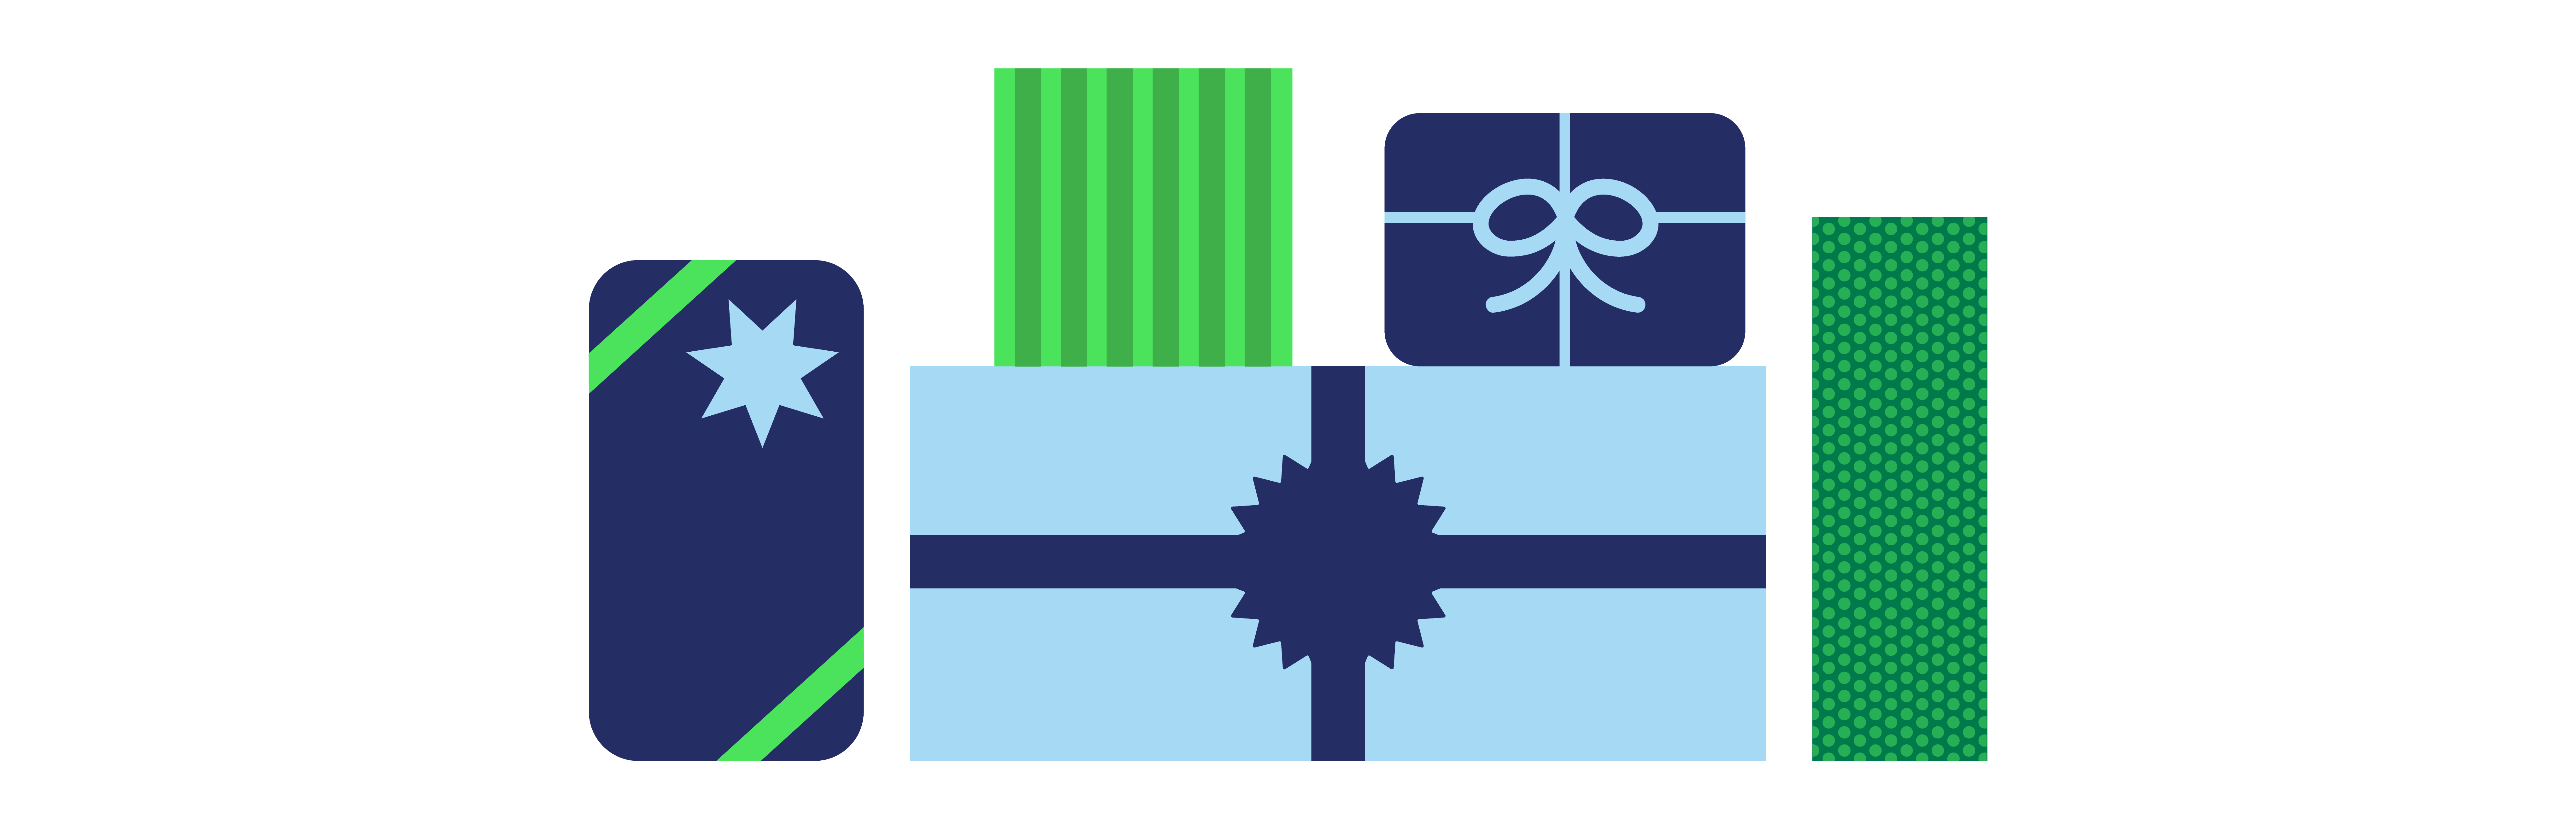 Illustration of various stacked blue and green giftboxes.